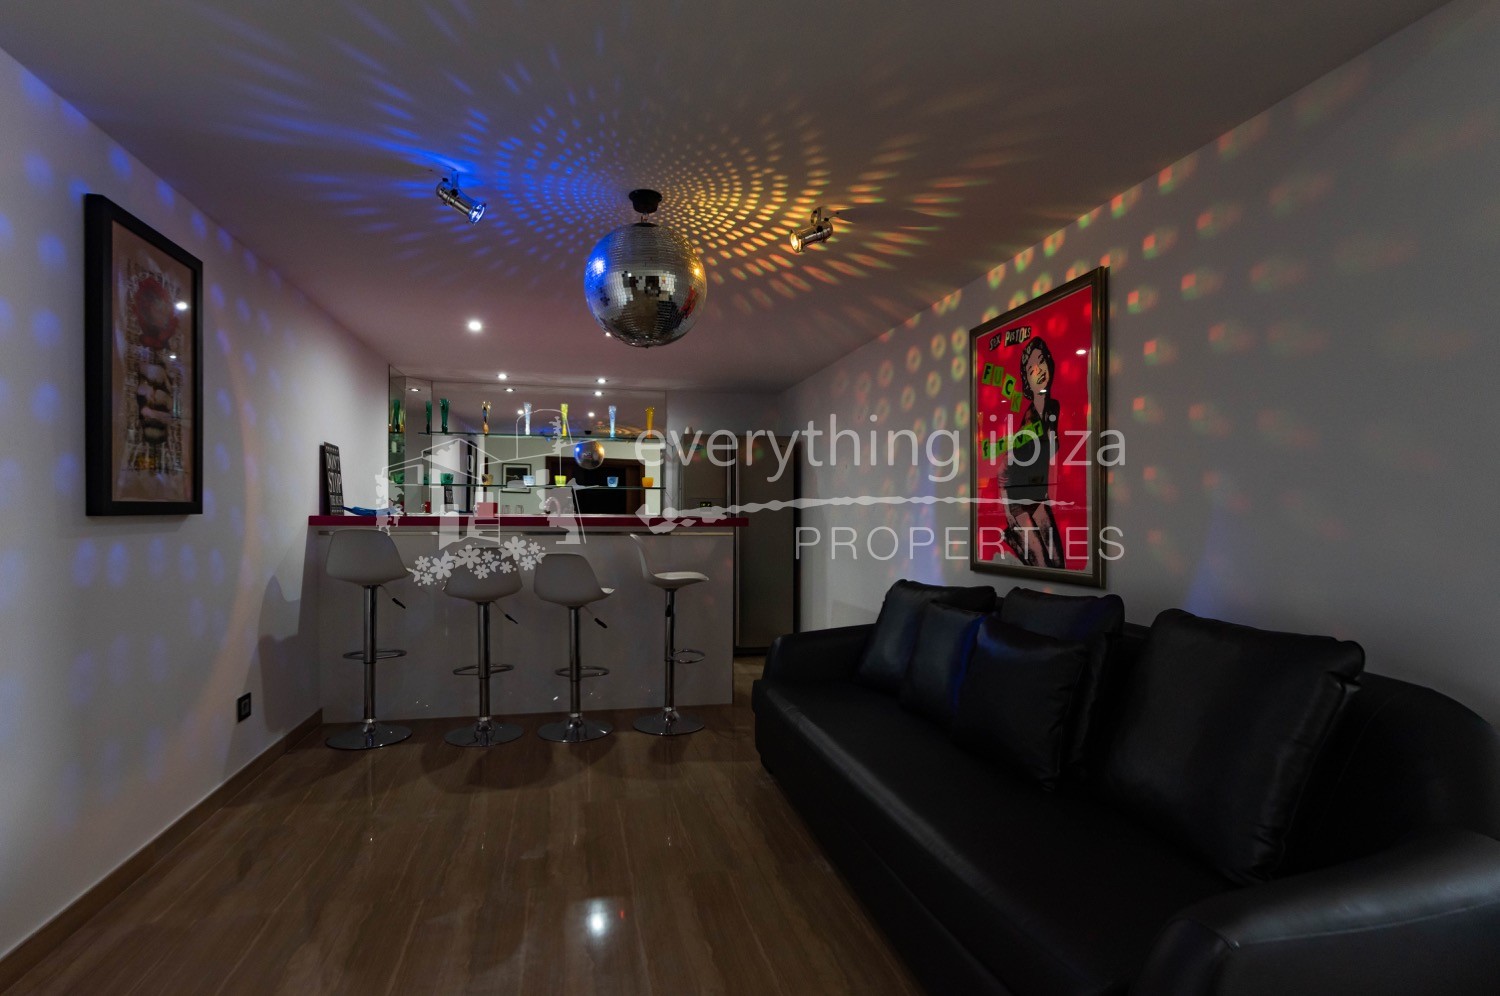 ref 1183 - Exquisite Villa for sale in Ibiza by everything ibiza Properties